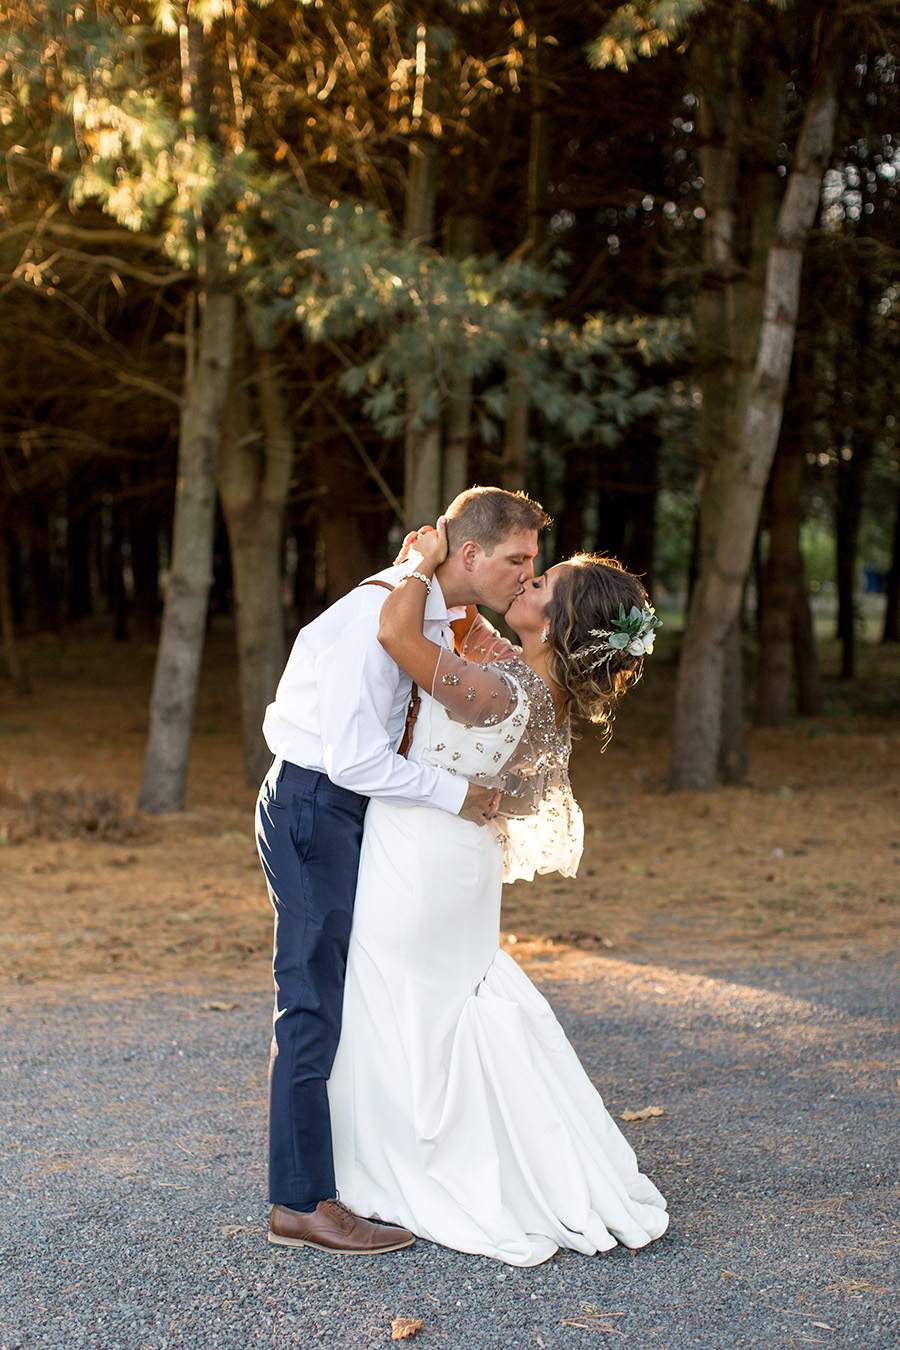 Last kiss on the wedding day